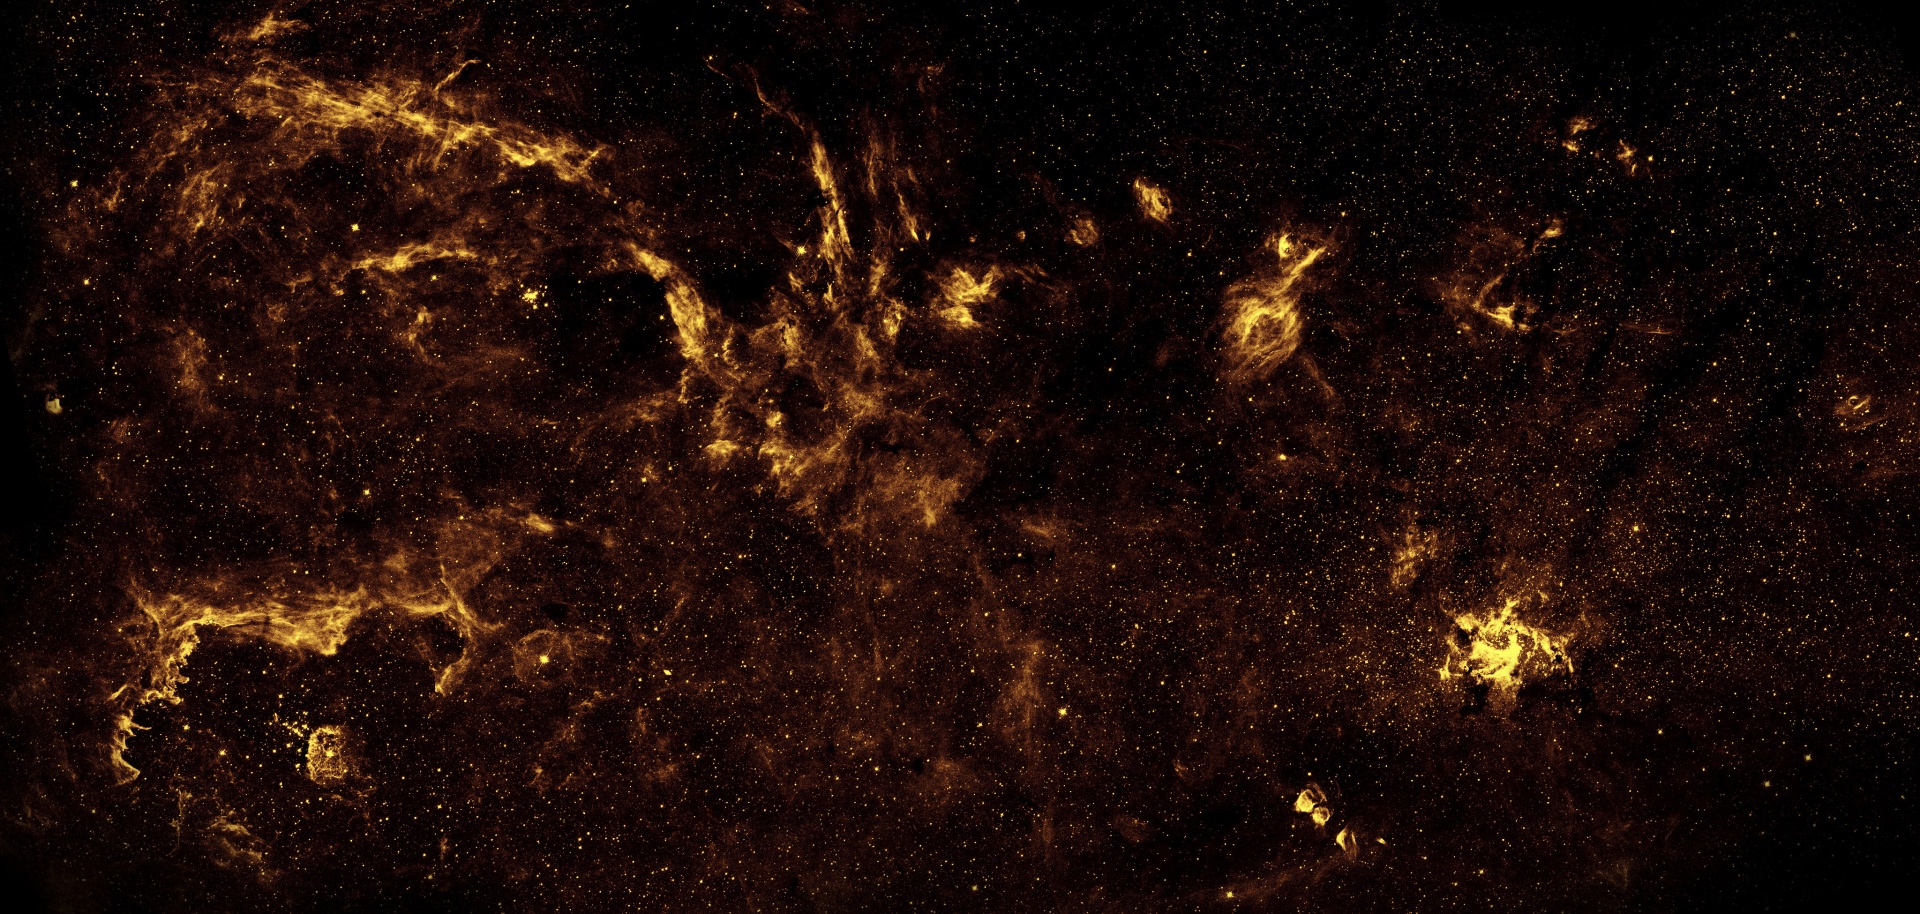 The Center Of The Milky Way Galaxy